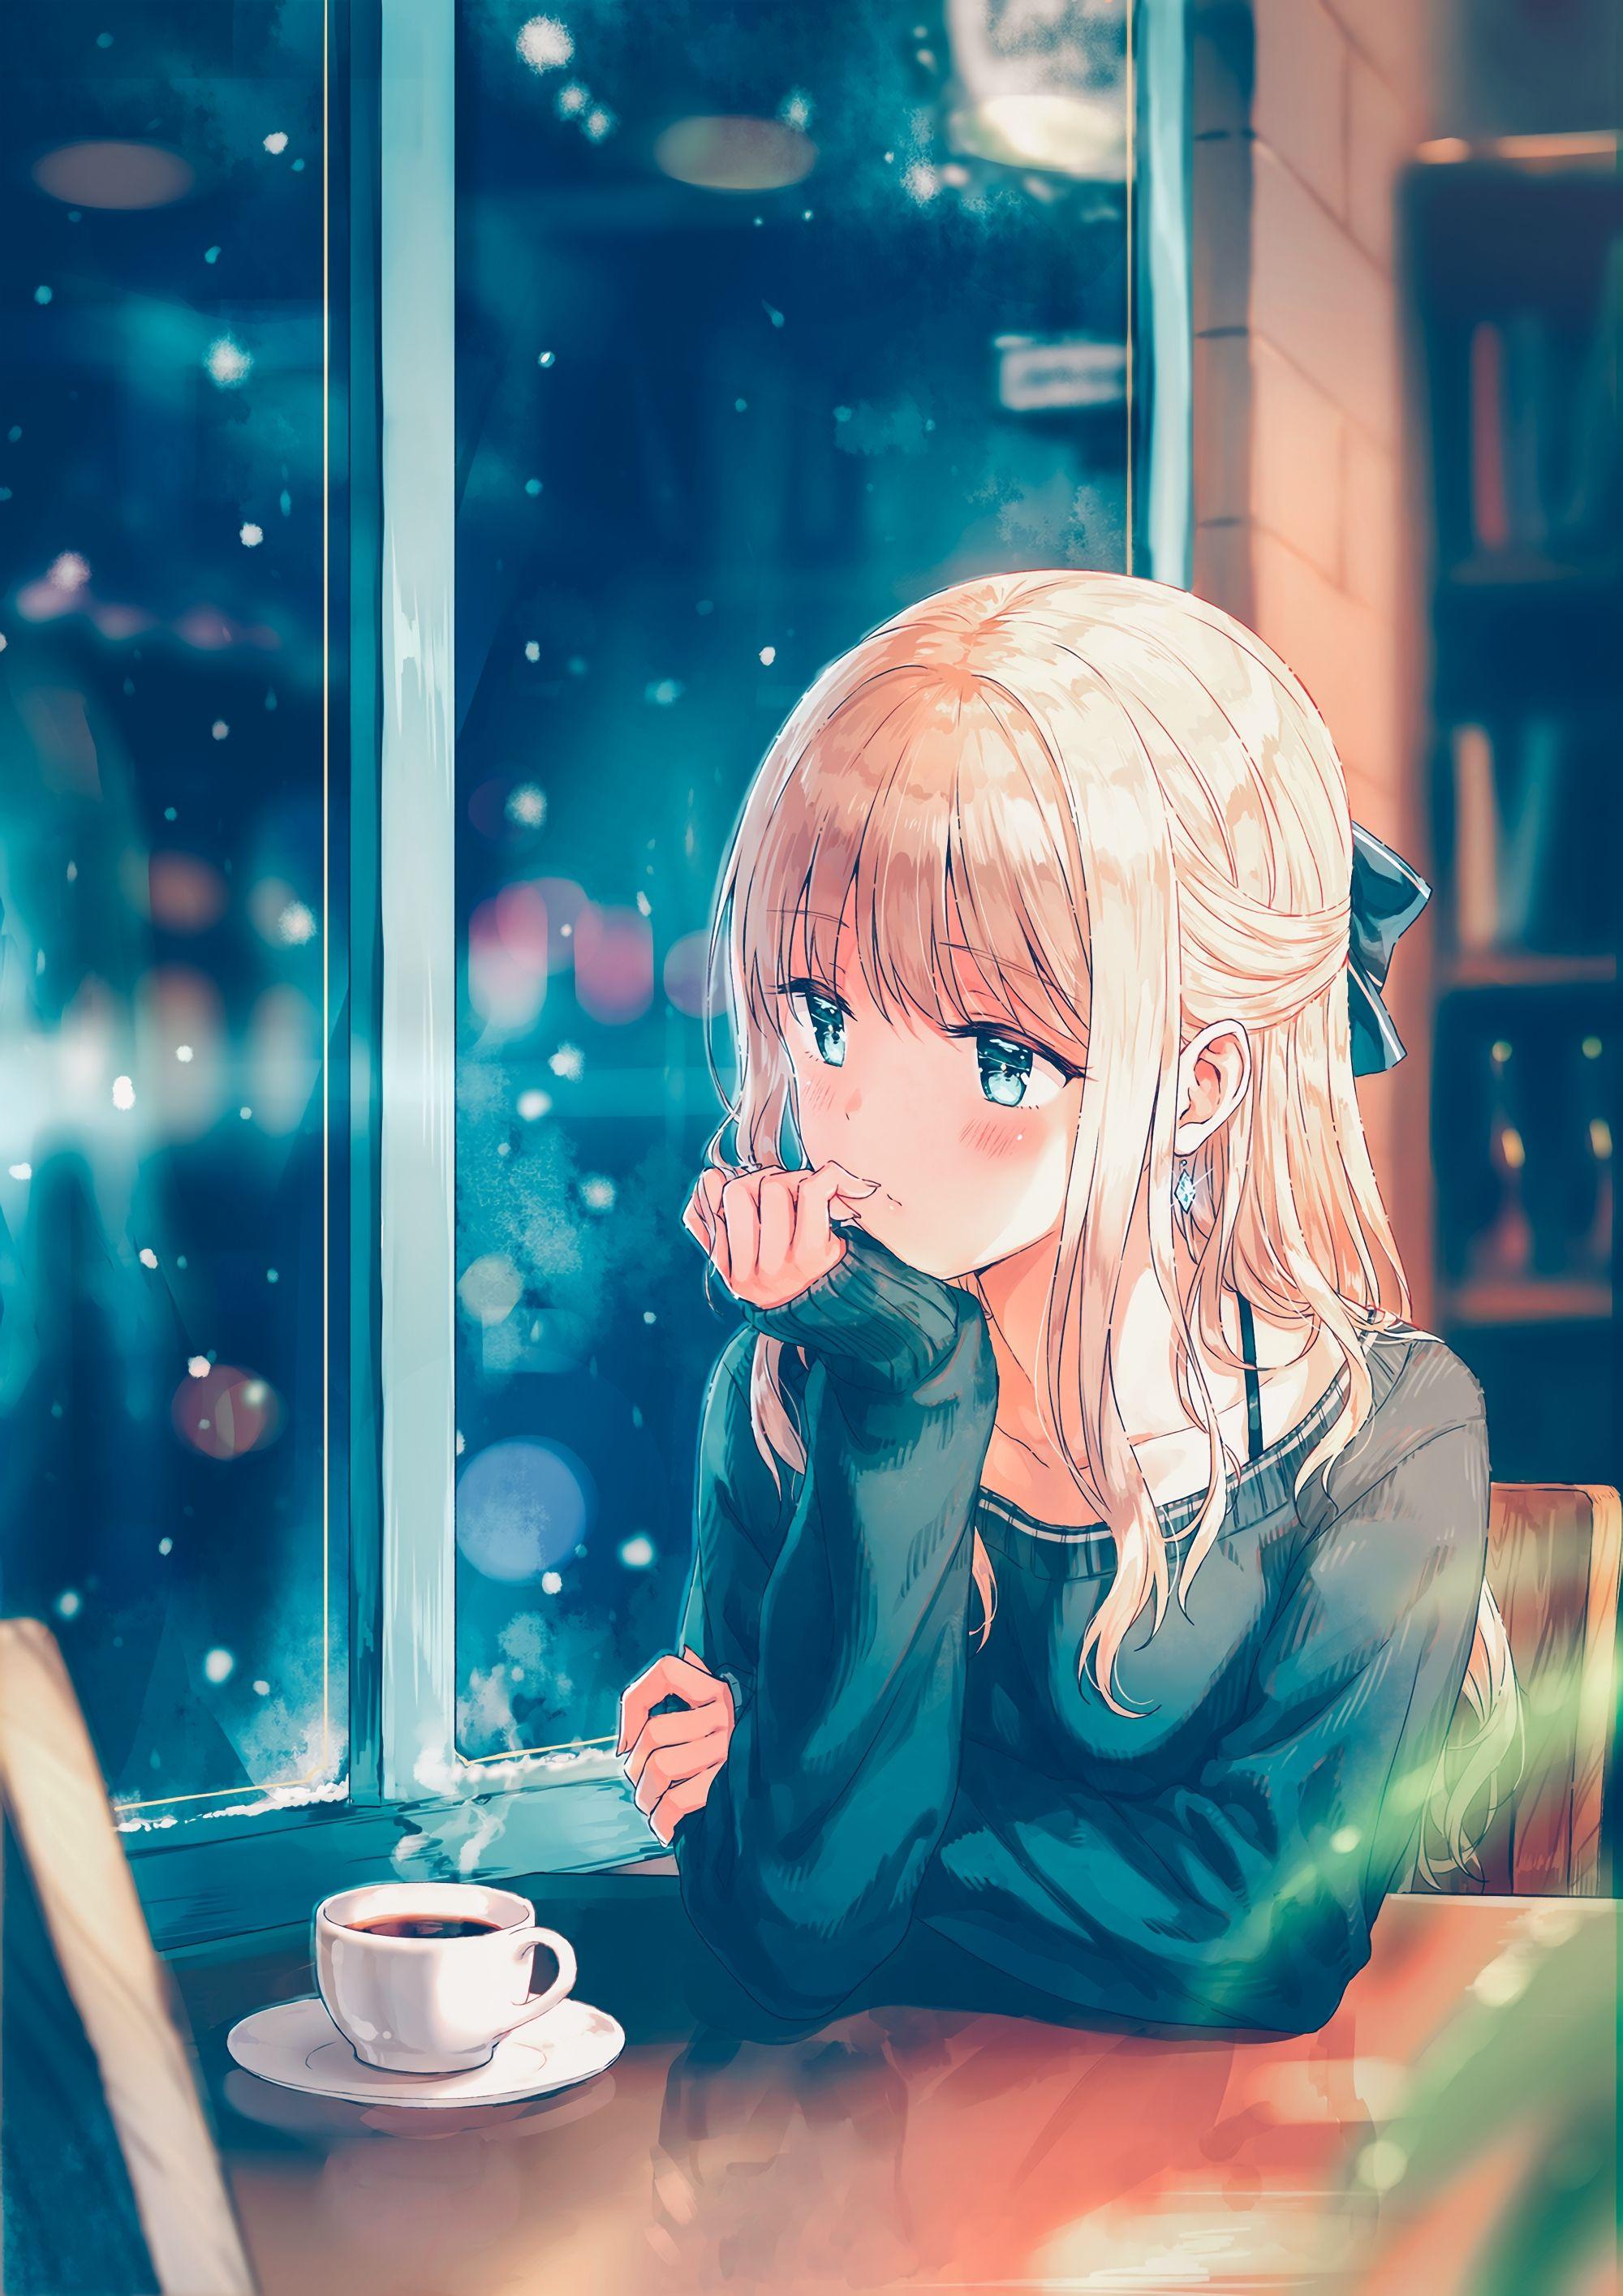 Anime Girl And Boy Wallpapers - Wallpaper Cave